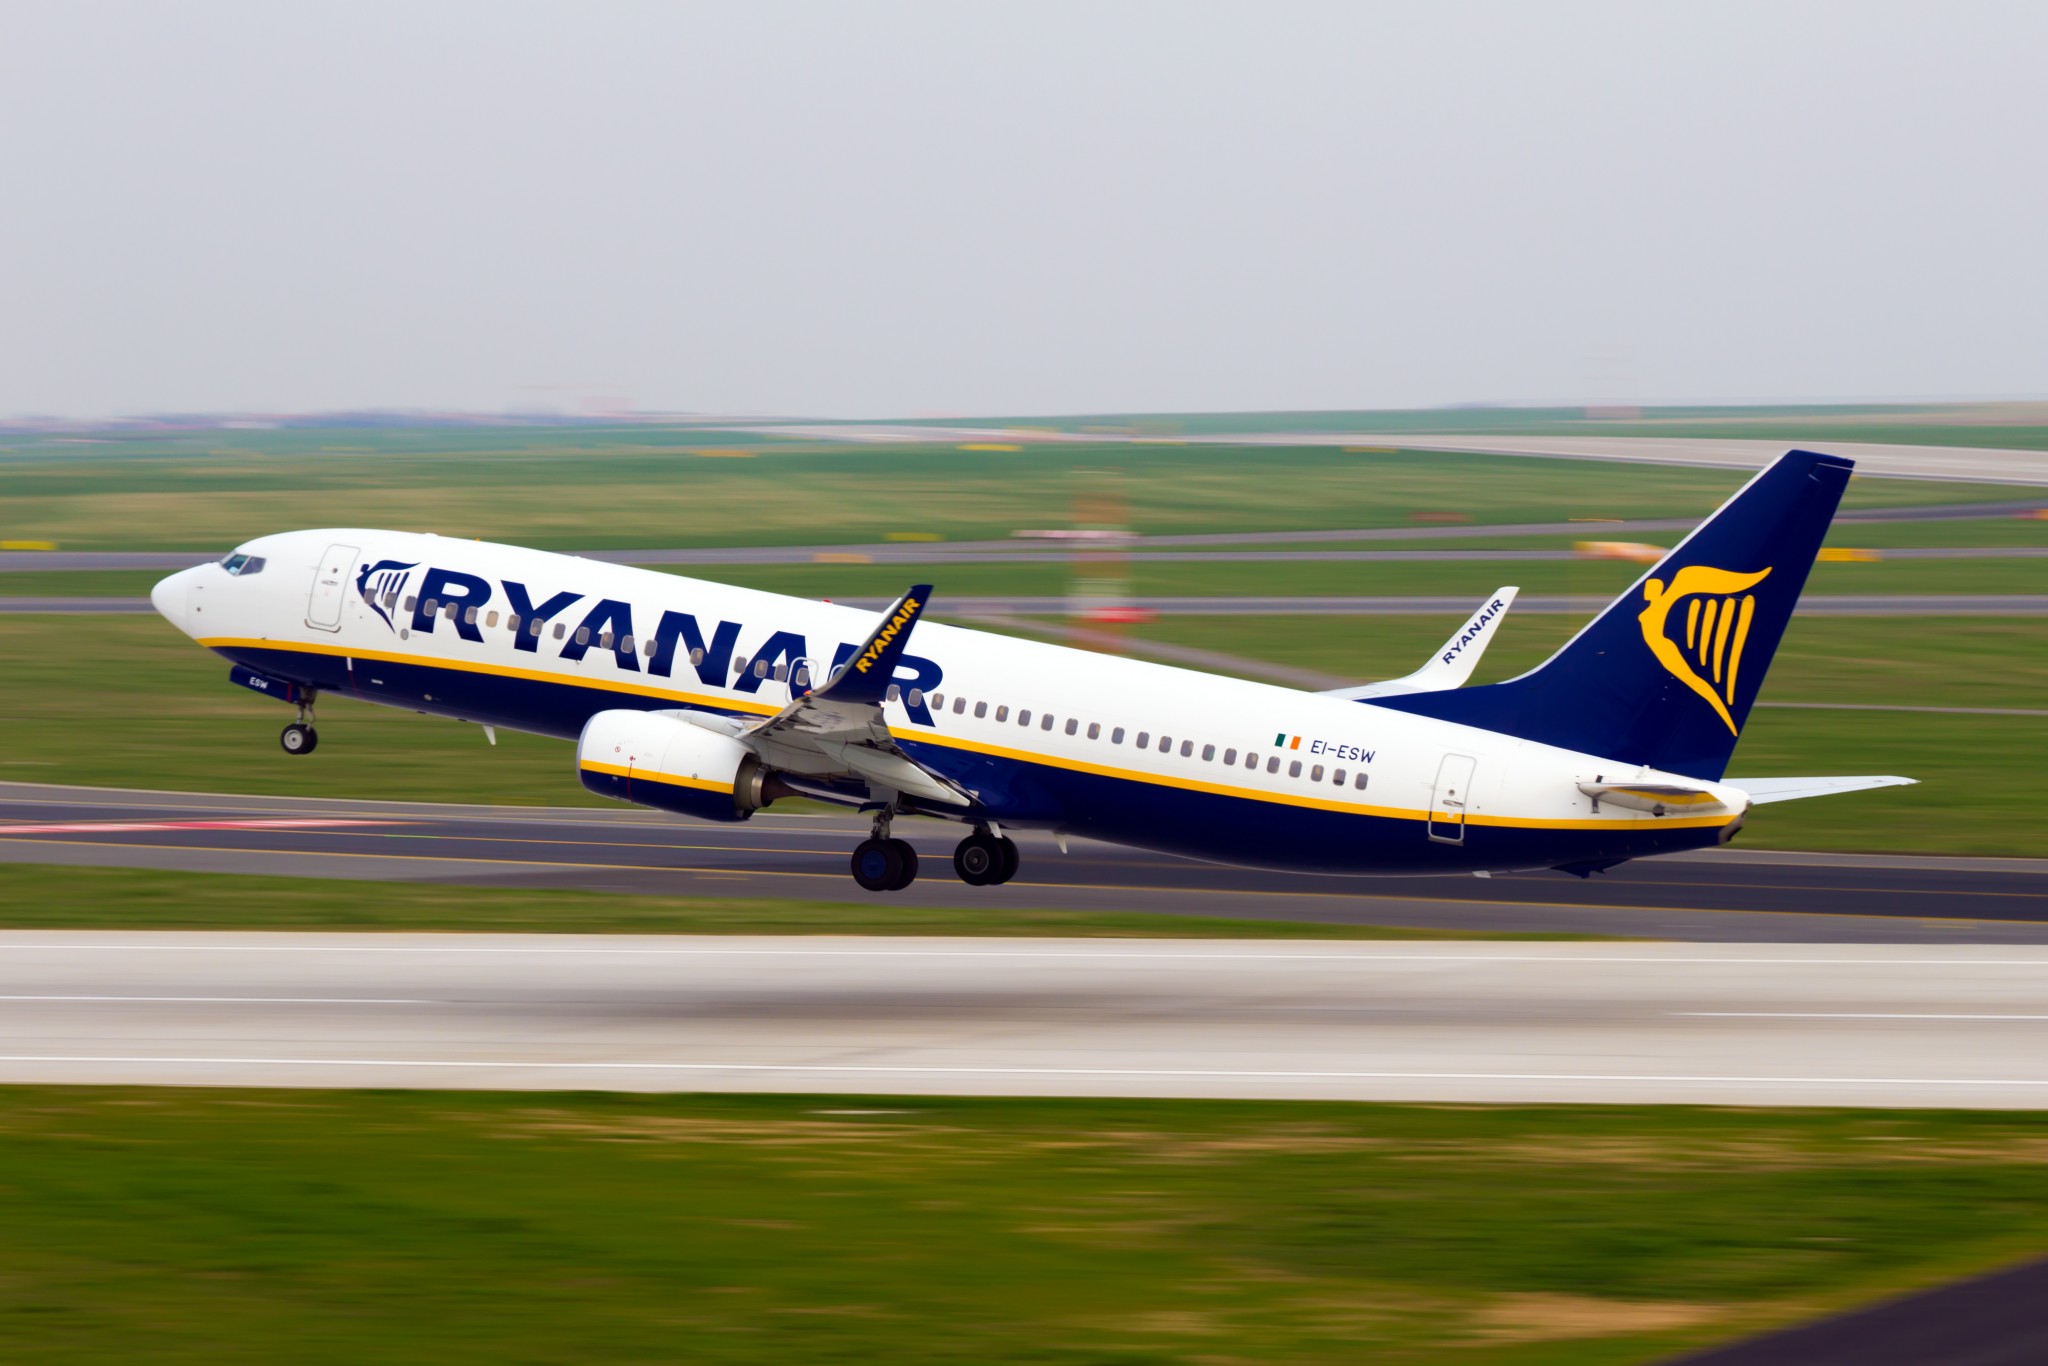 Ryanair’s petition to EU Commission approaching 400,000 signatures